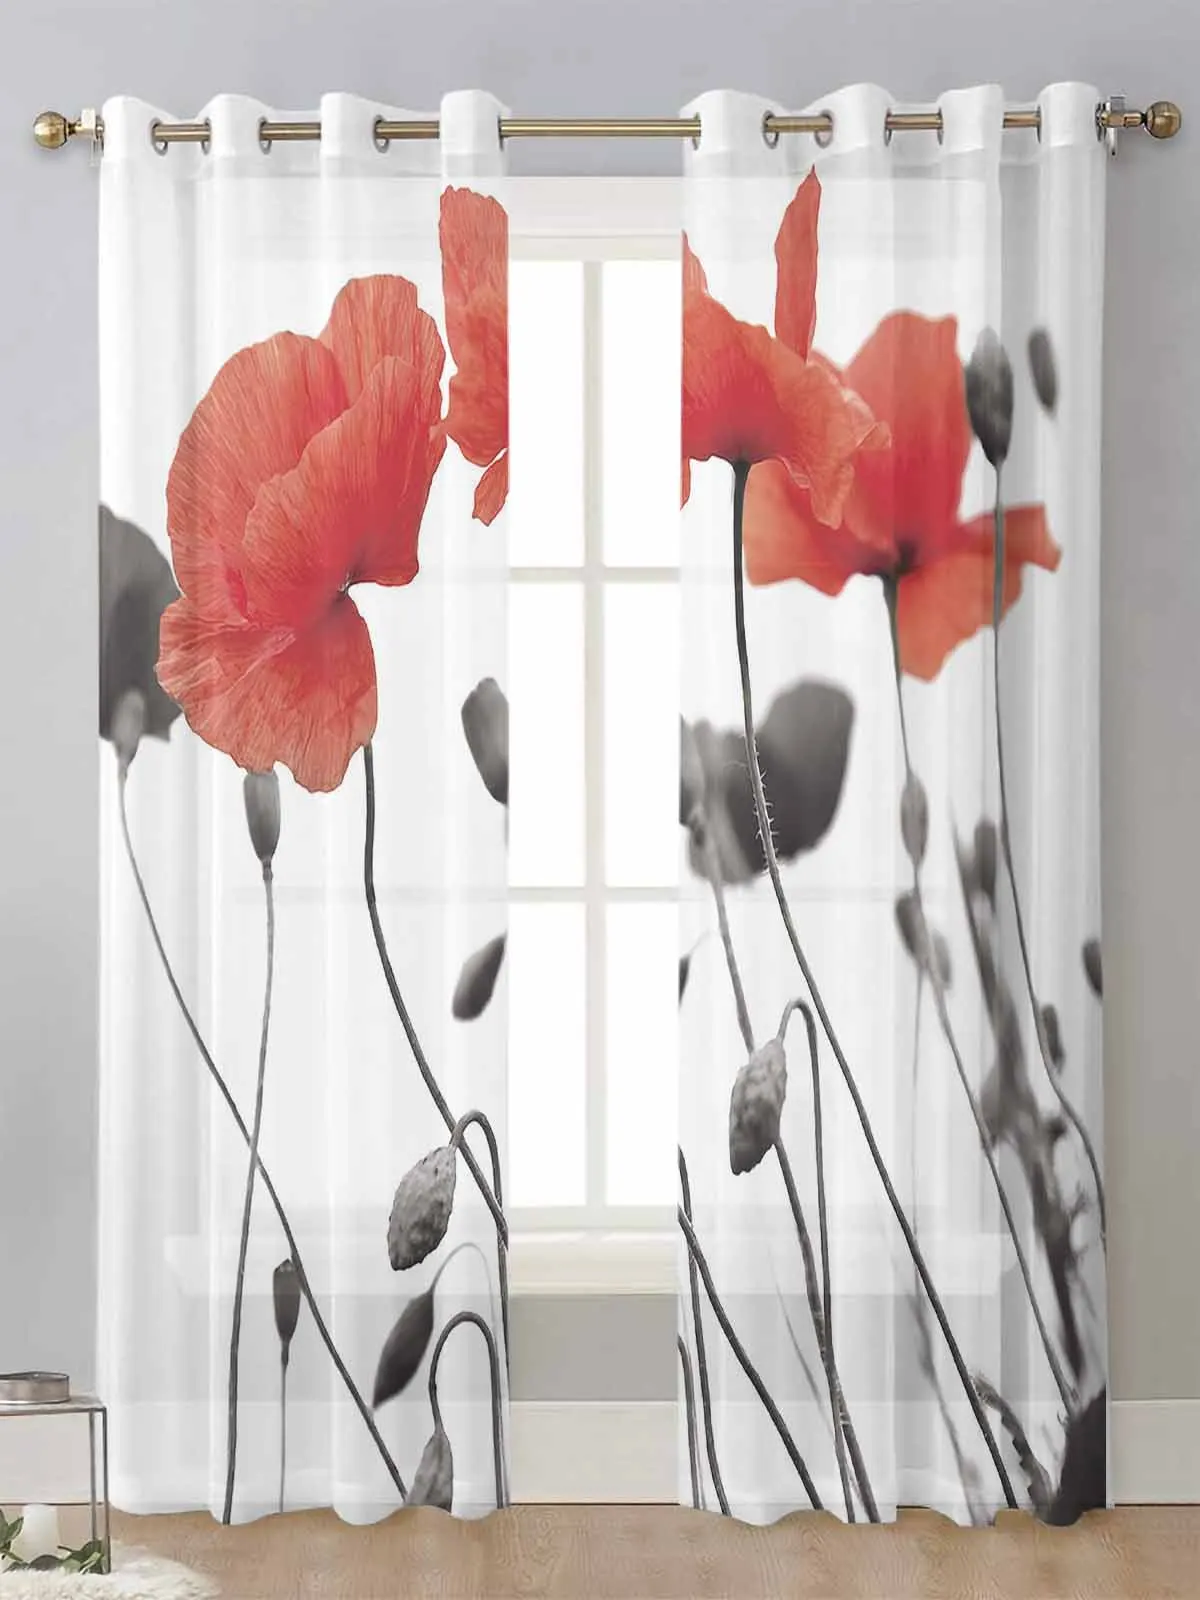 

Red Poppy Flower Sheer Curtains For Living Room Window Screening Transparent Voile Tulle Curtain Cortinas Drapes Home Decor